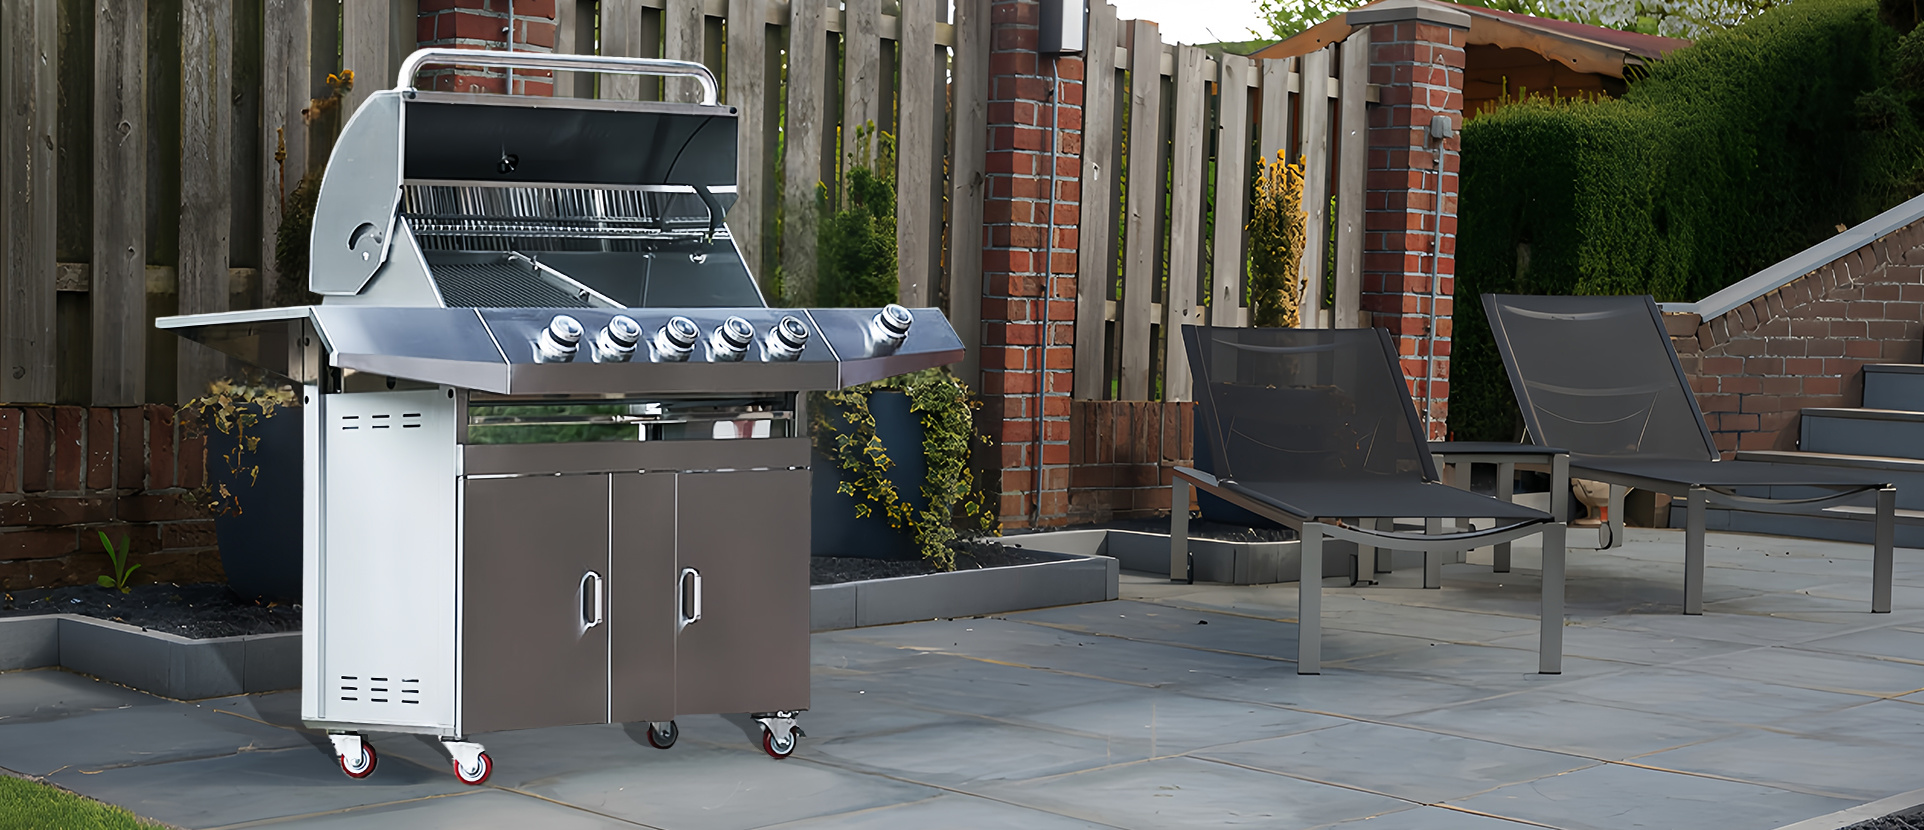 FREESTANDING GAS GRILL